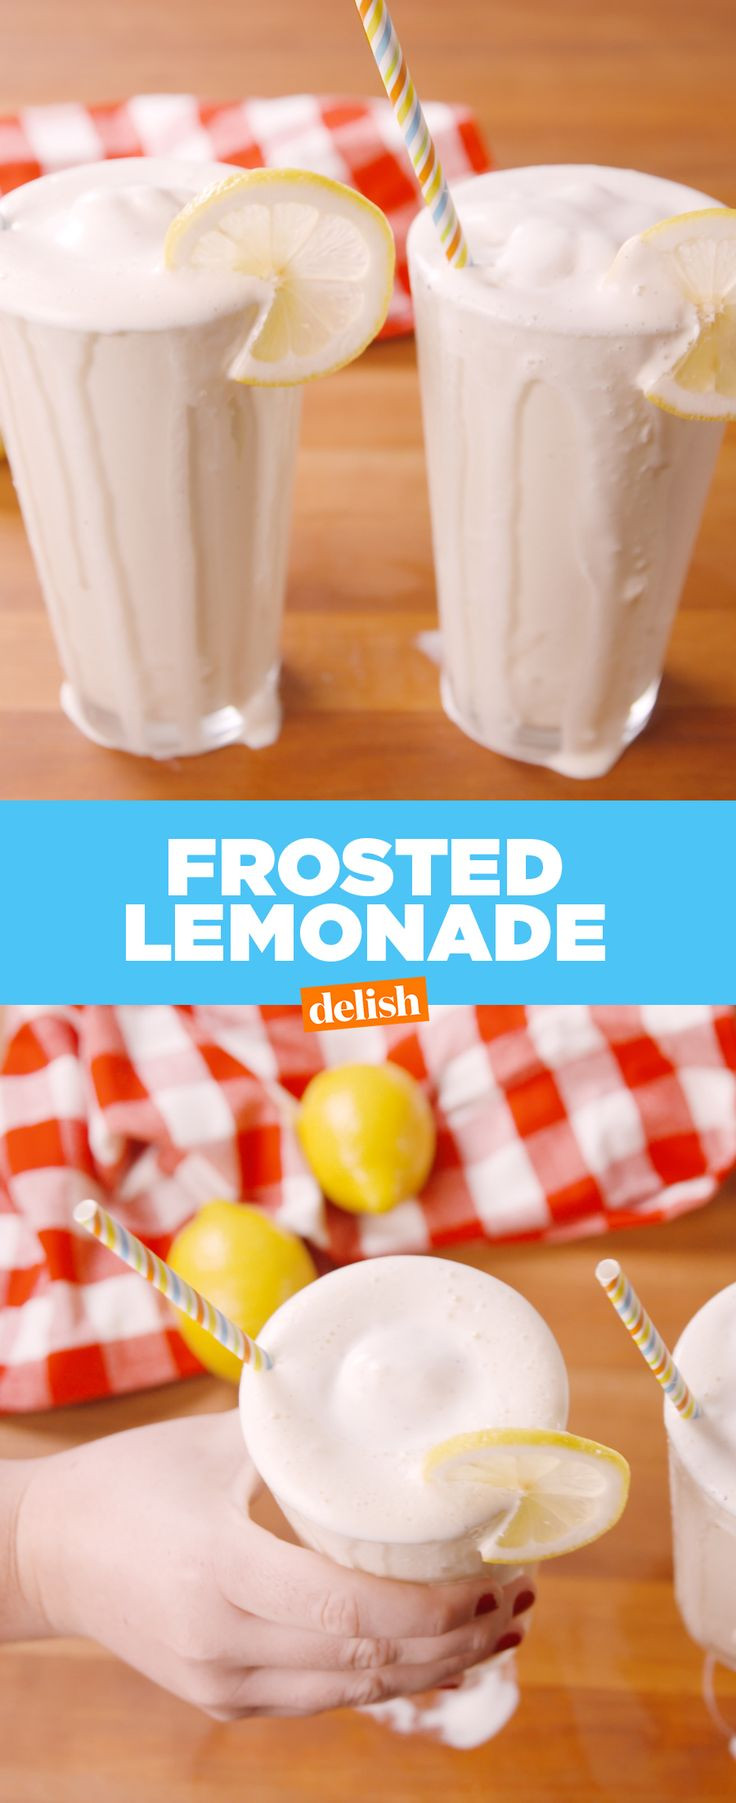 Chick Fil A Desserts
 Chick Fil A fans you can make the cult favorite Frosted